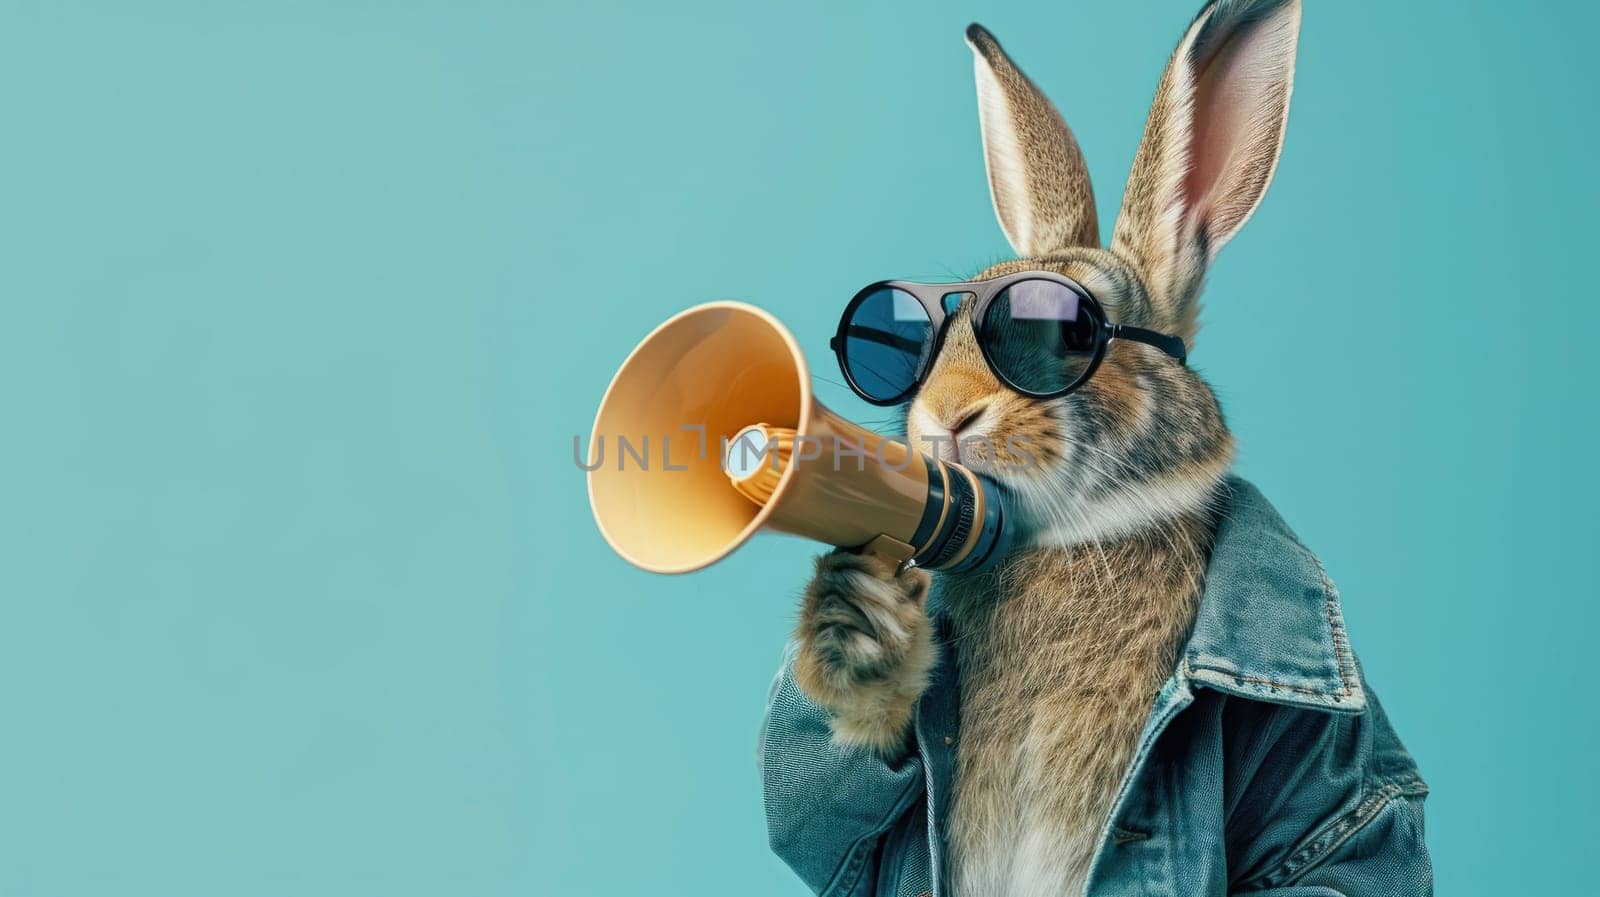 A trendy rabbit making a statement with a megaphone, dressed in a denim jacket and sunglasses.